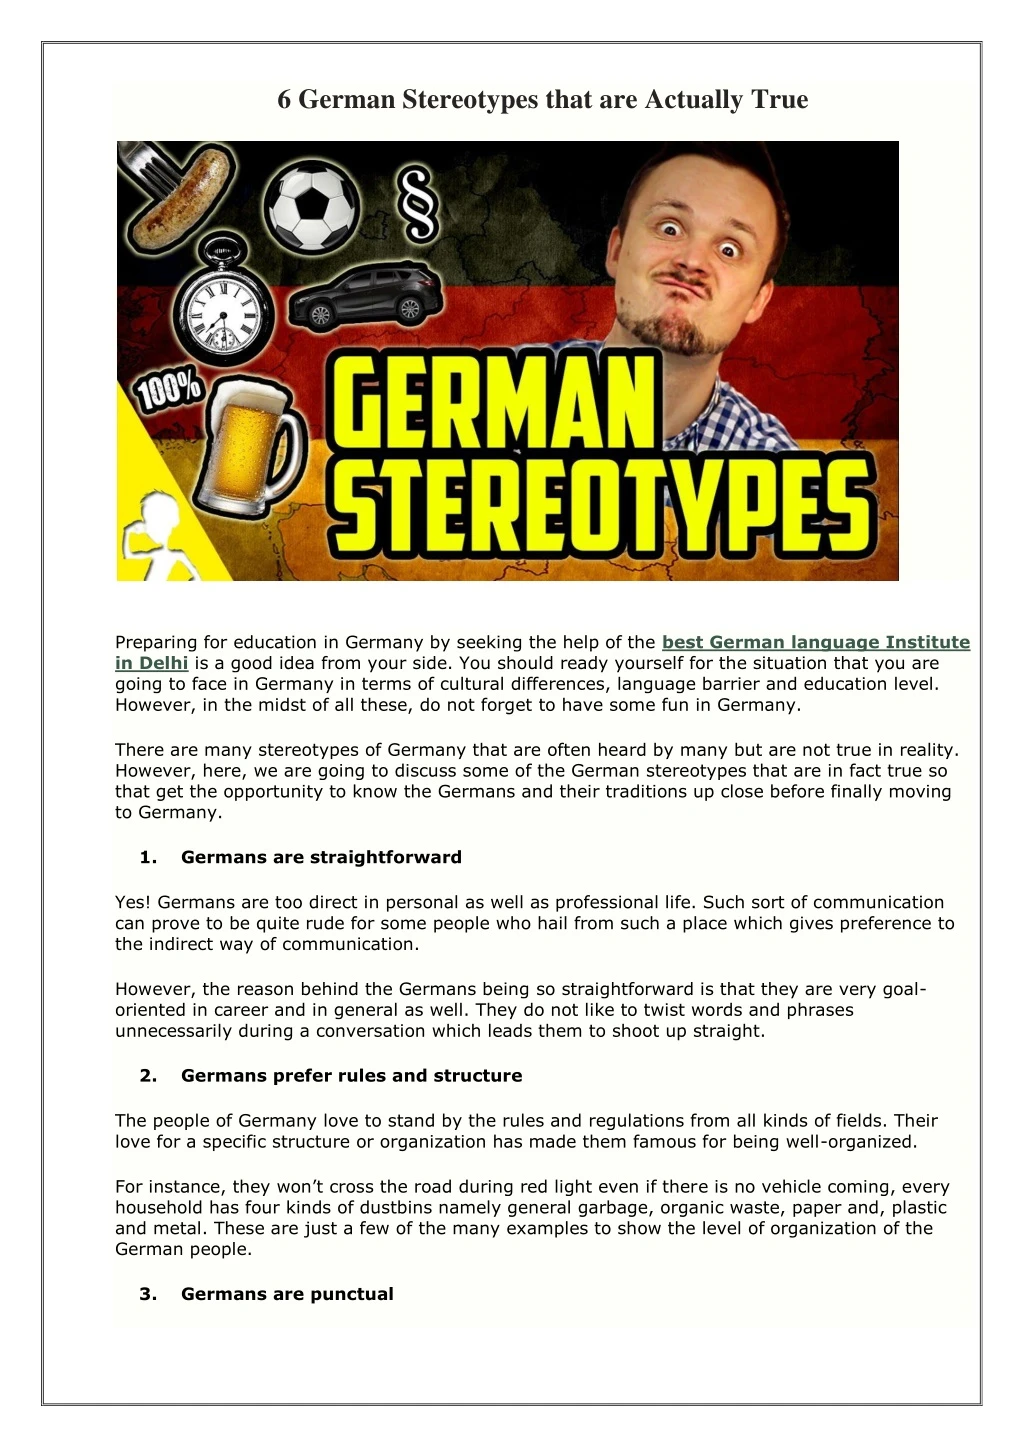 6 german stereotypes that are actually true